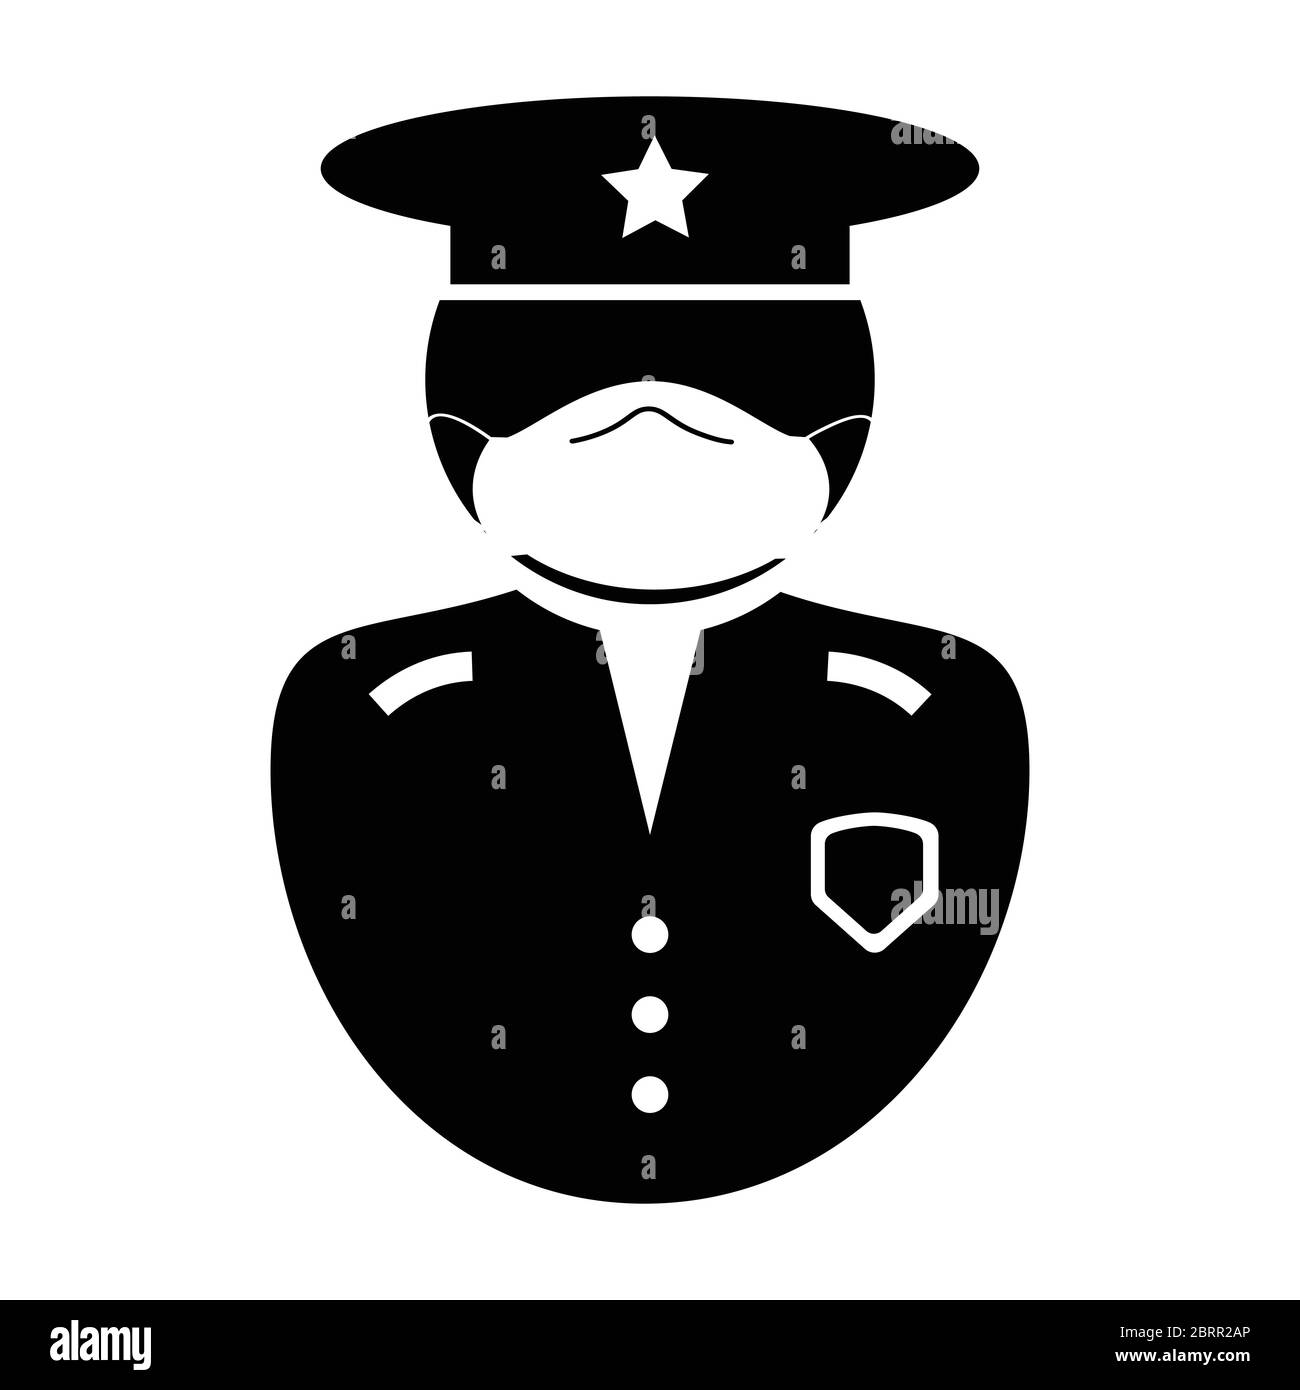 Police Officer Icon. Black and white illustration pictogram icon depicting uniformed law enforcement officer with facial mask, hat and badge. Illustra Stock Vector